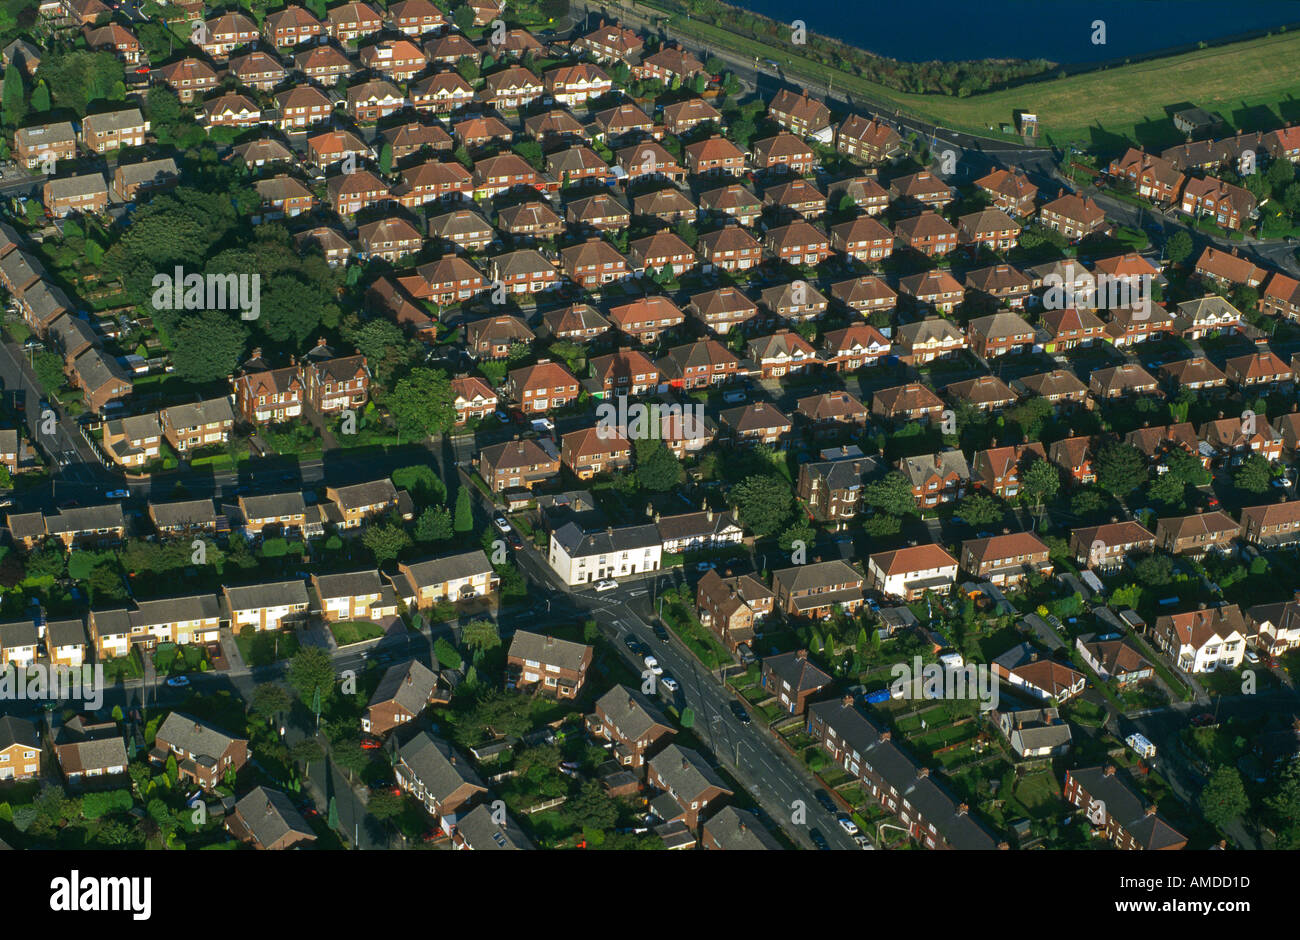 Aerial view of Manchester suburbs Stock Photo